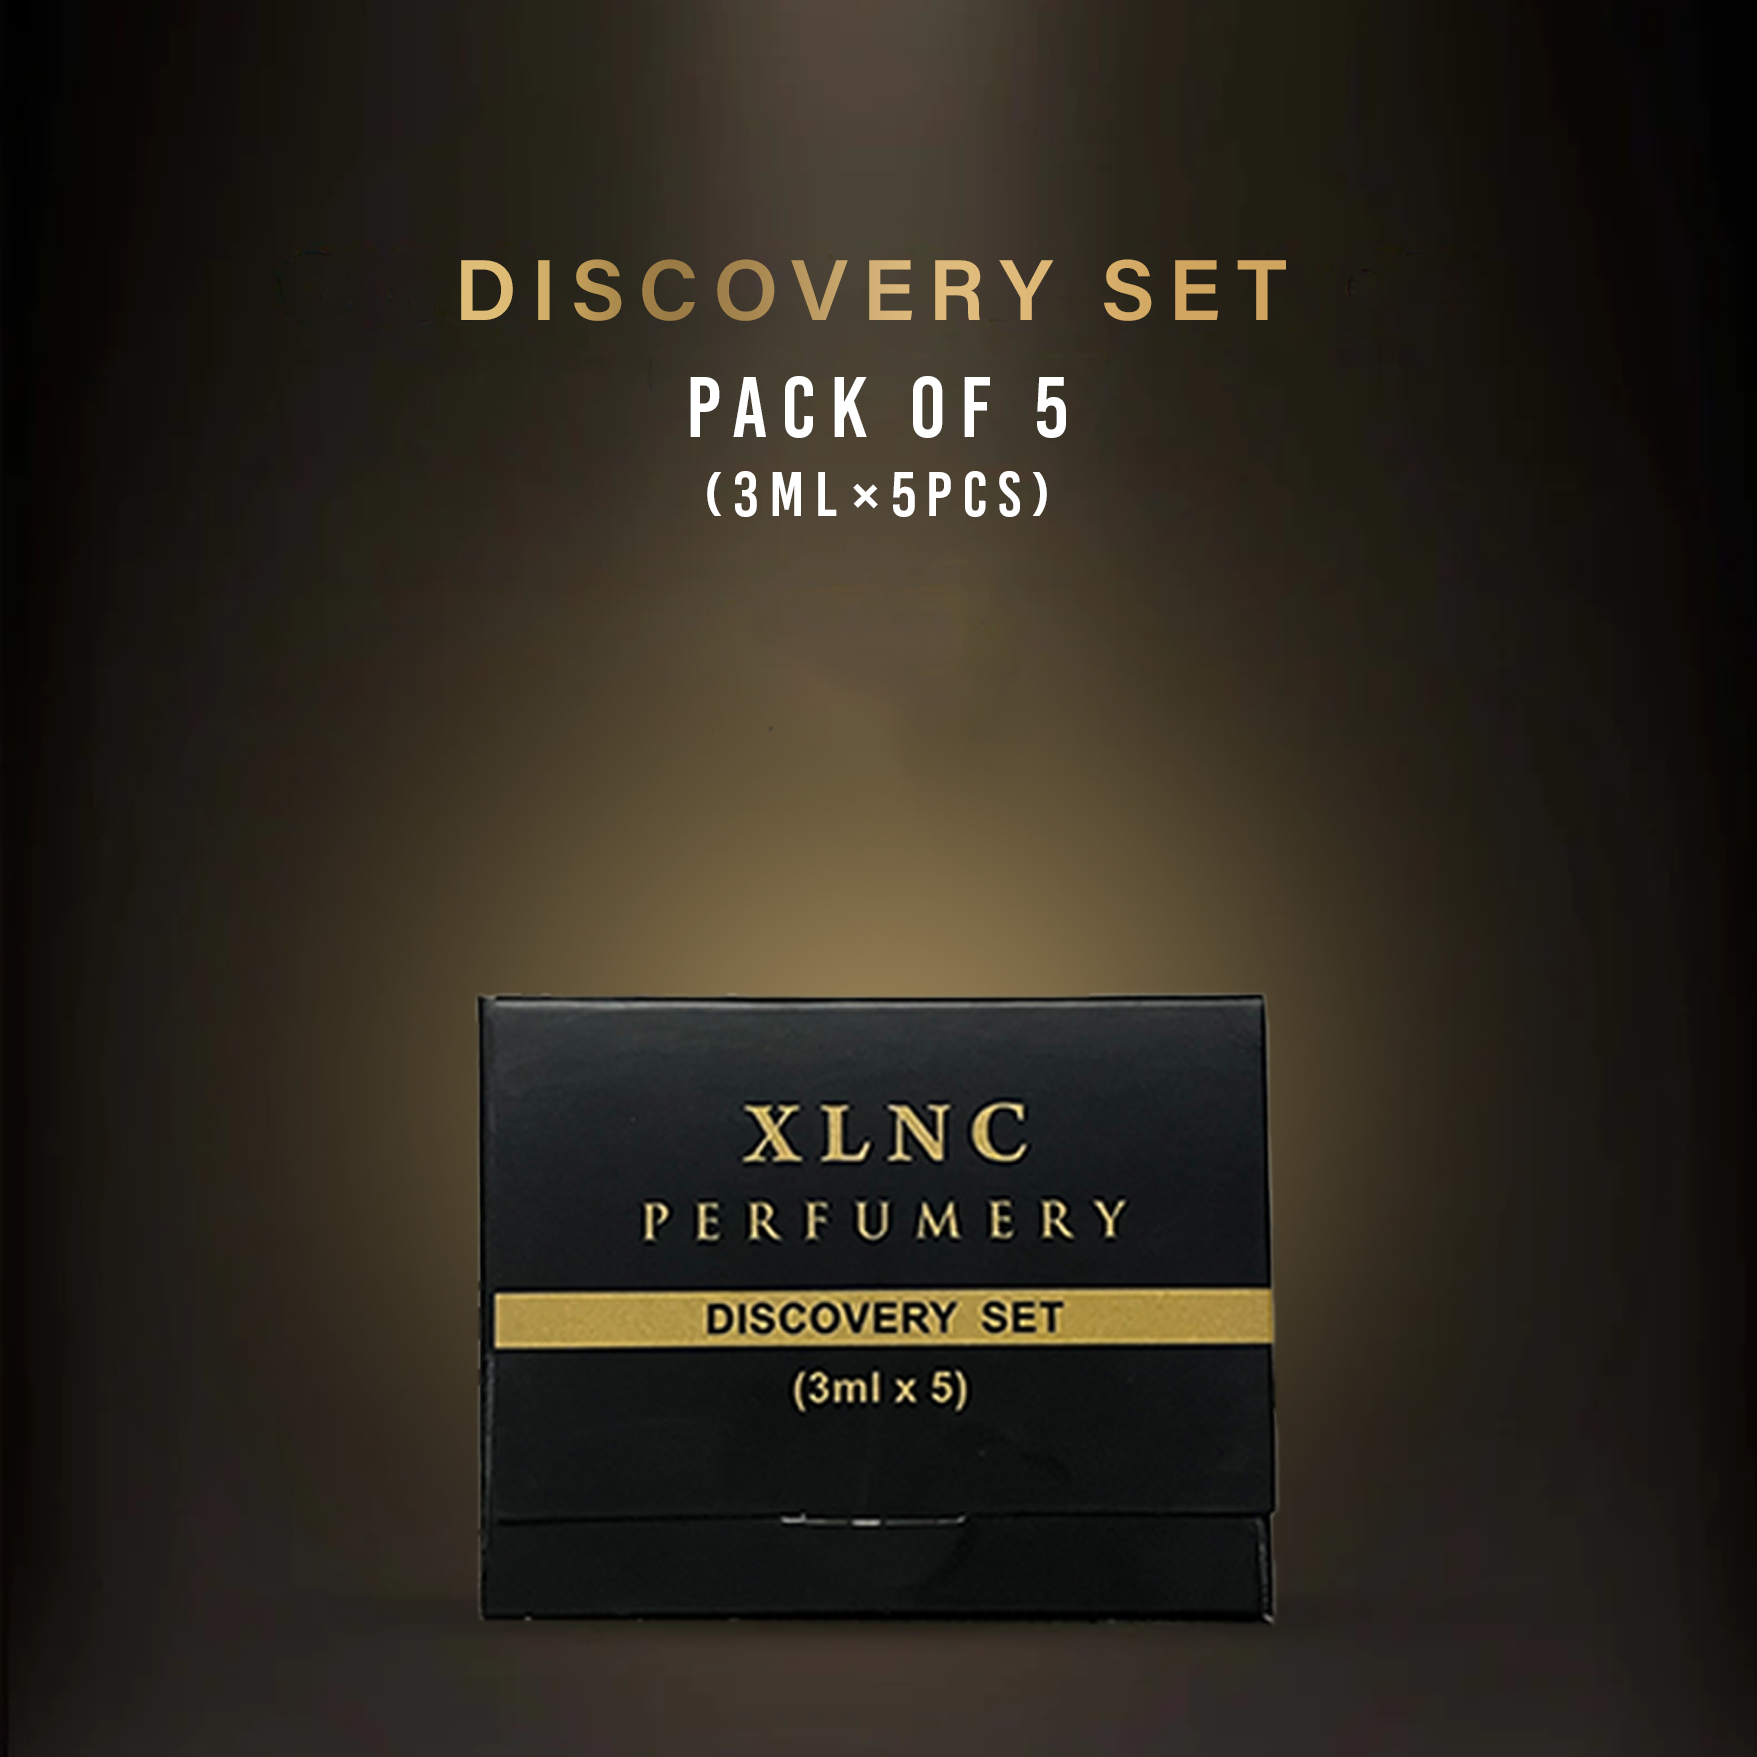 Newly Launched Discovery Set (November)